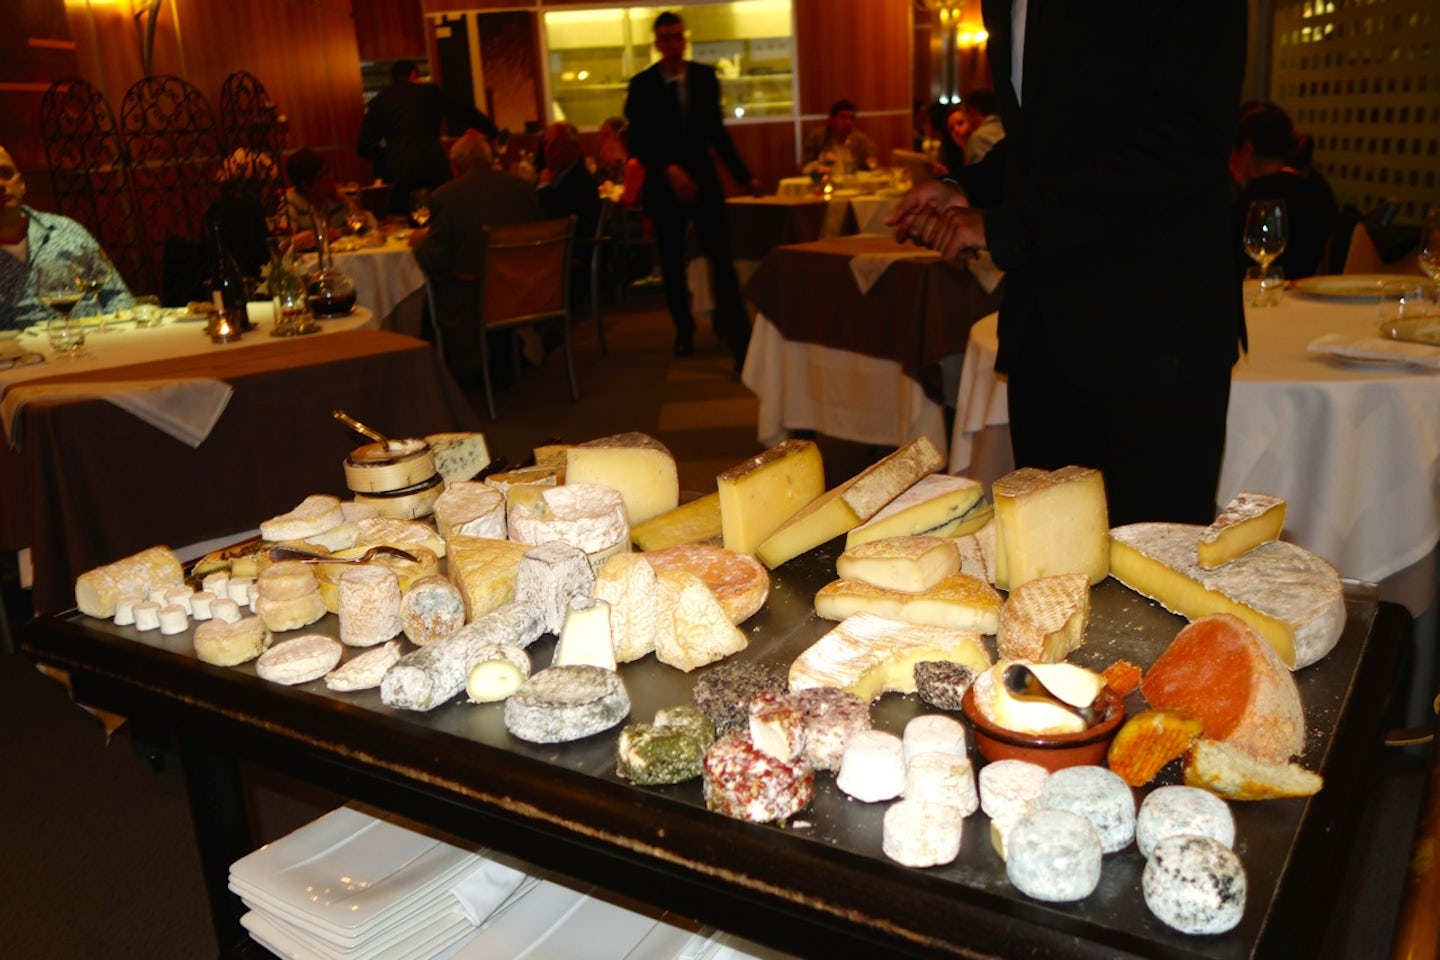 l'ambassade, in beziers, has a very impressive cheese trolley - our one meal ashore is up to anjodi's standard